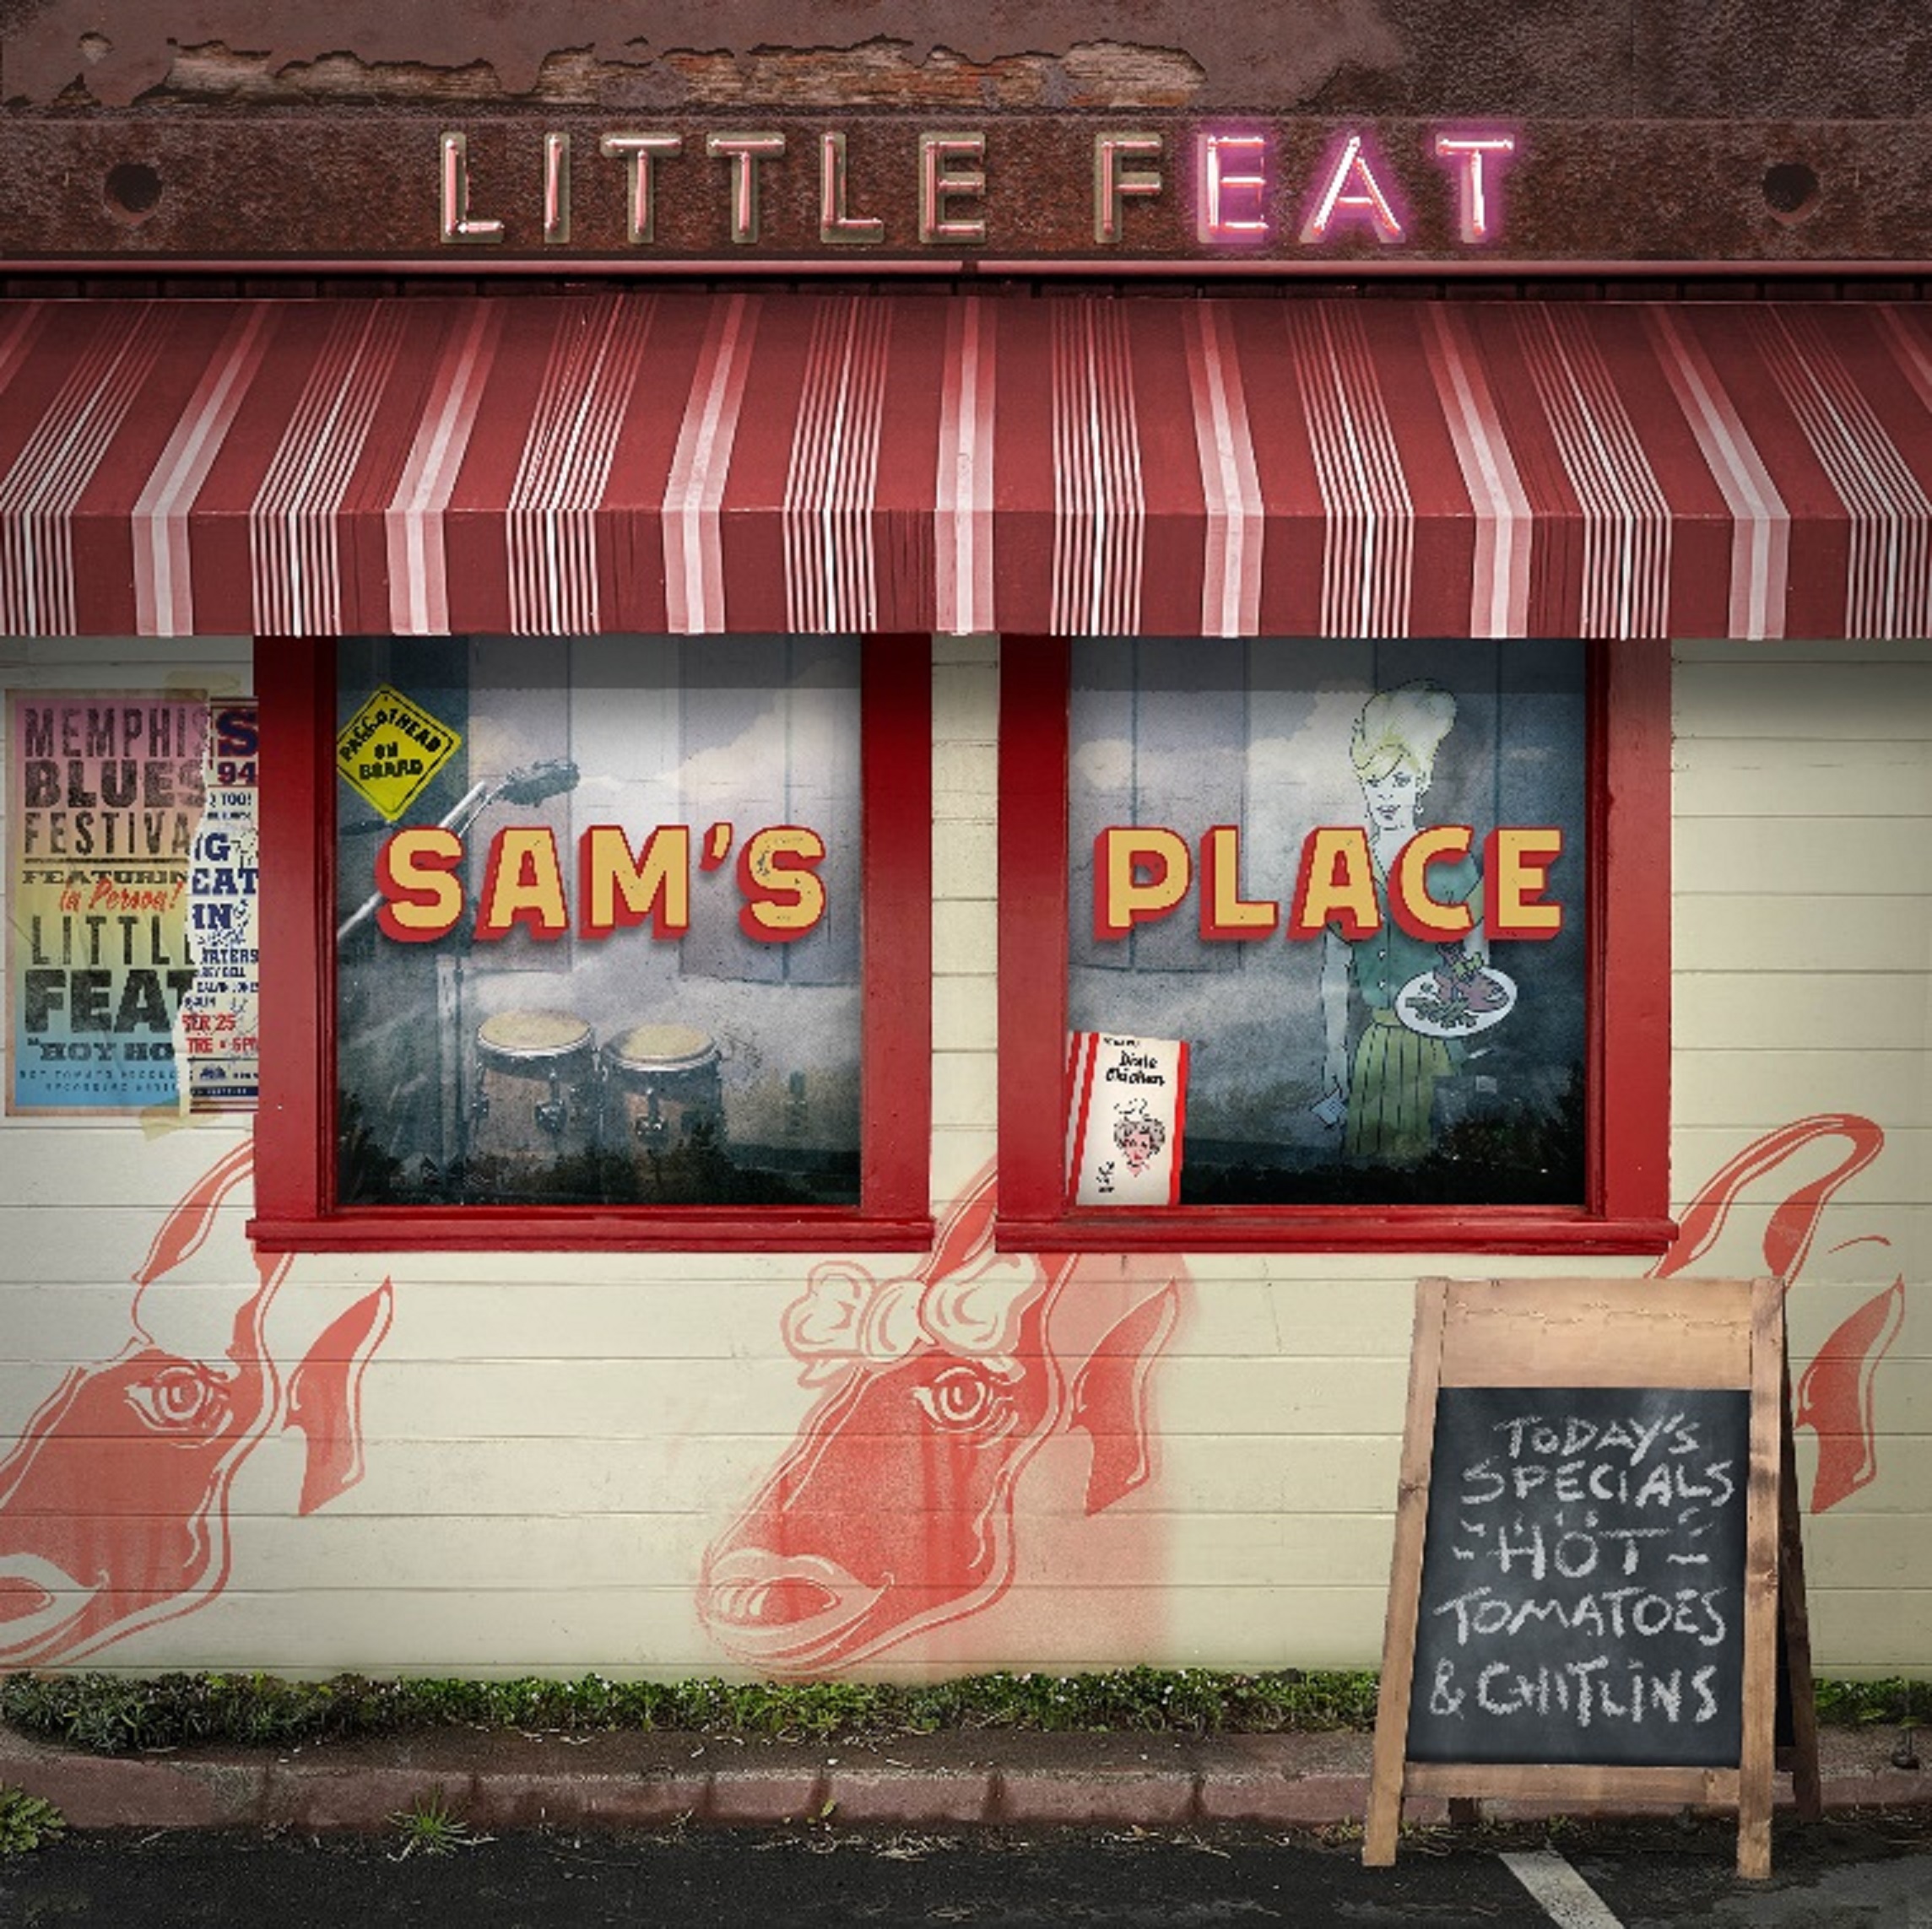 LITTLE FEAT TO RELEASE ‘SAM’S PLACE,’ THEIR FIRST NEW STUDIO ALBUM IN 12 YEARS